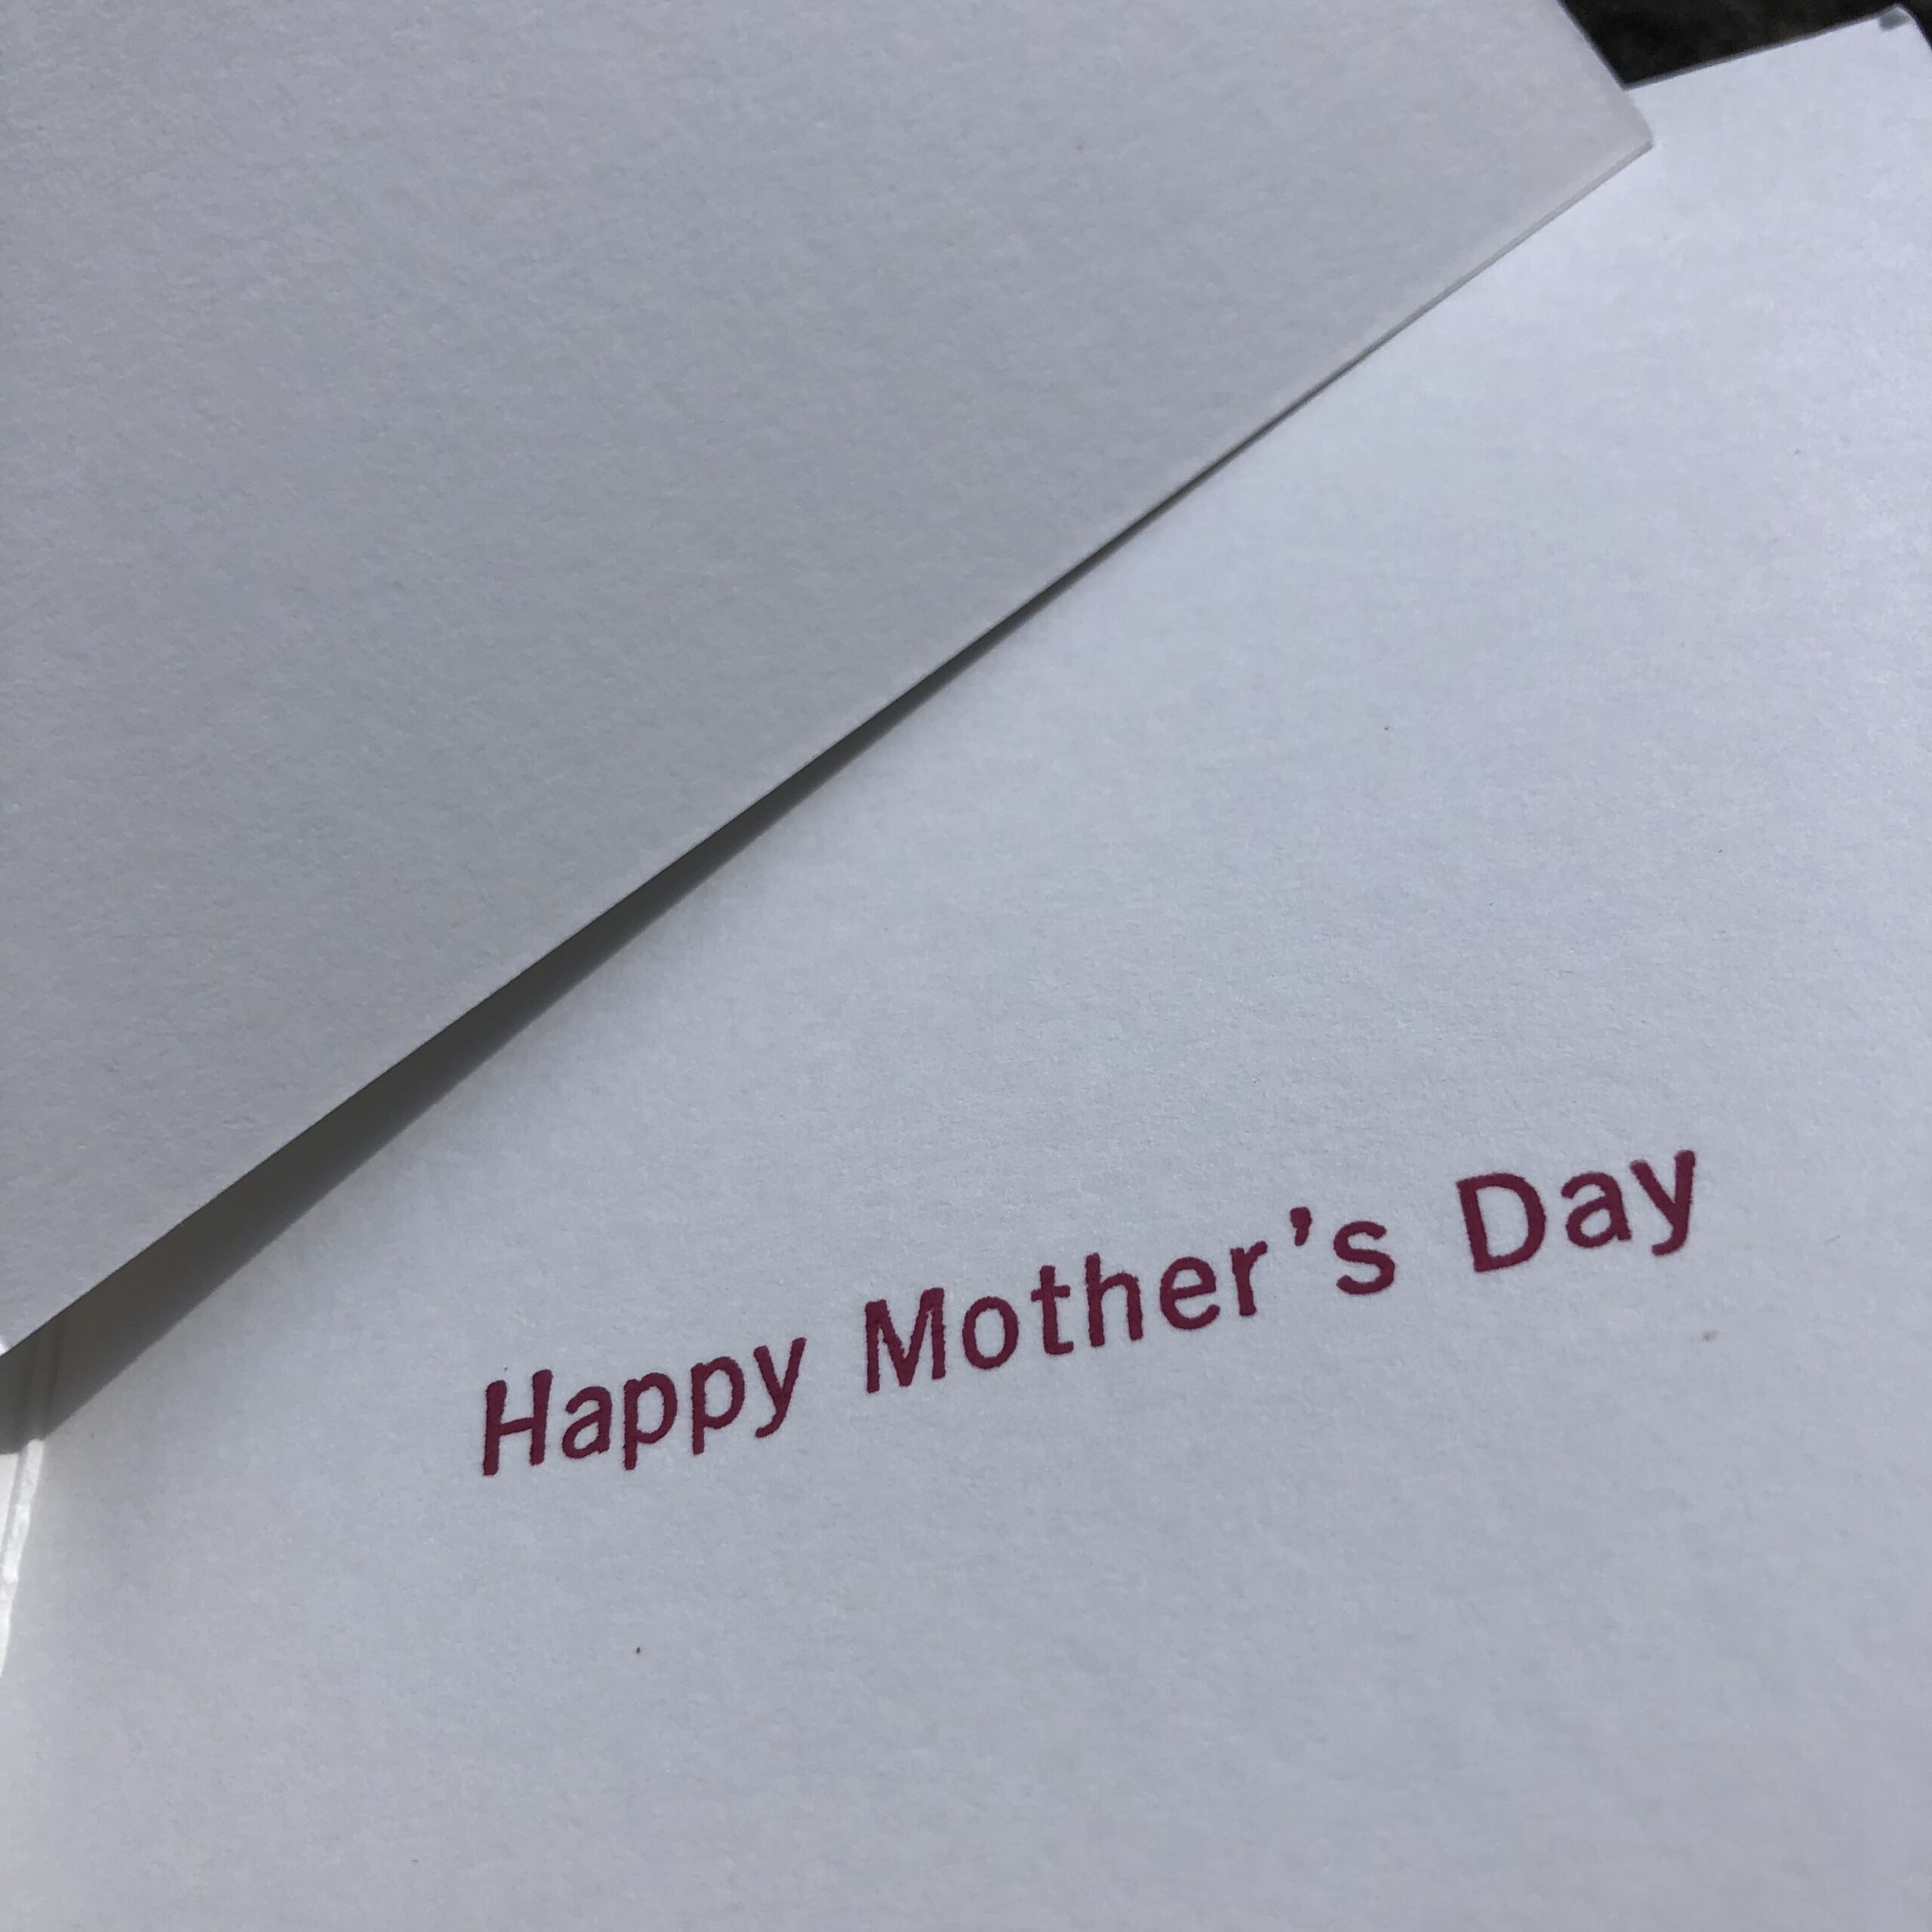 Happy Mother’s Day greeting in mulberry red ink.